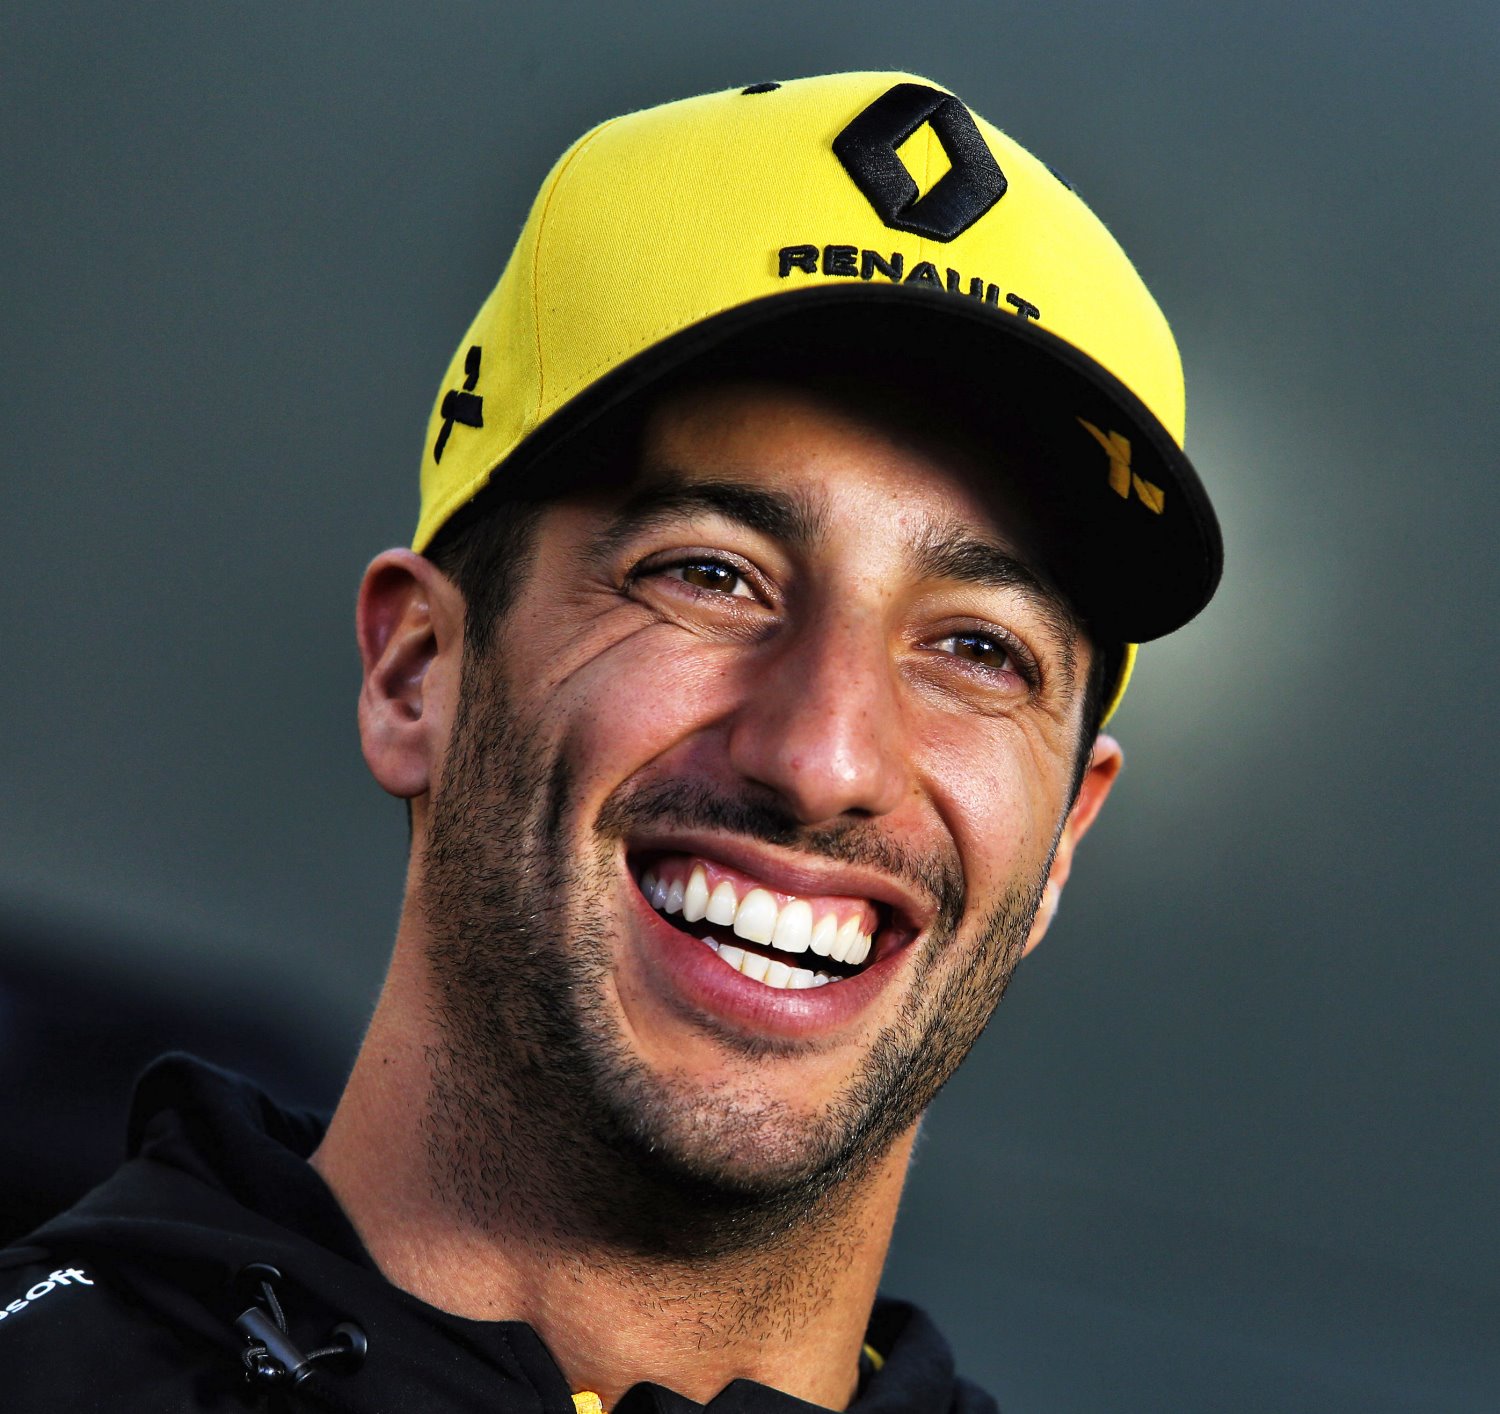 We all knew Ricciardo did not move to Renault to win, but to collect a huge paycheck for two years and retire rich